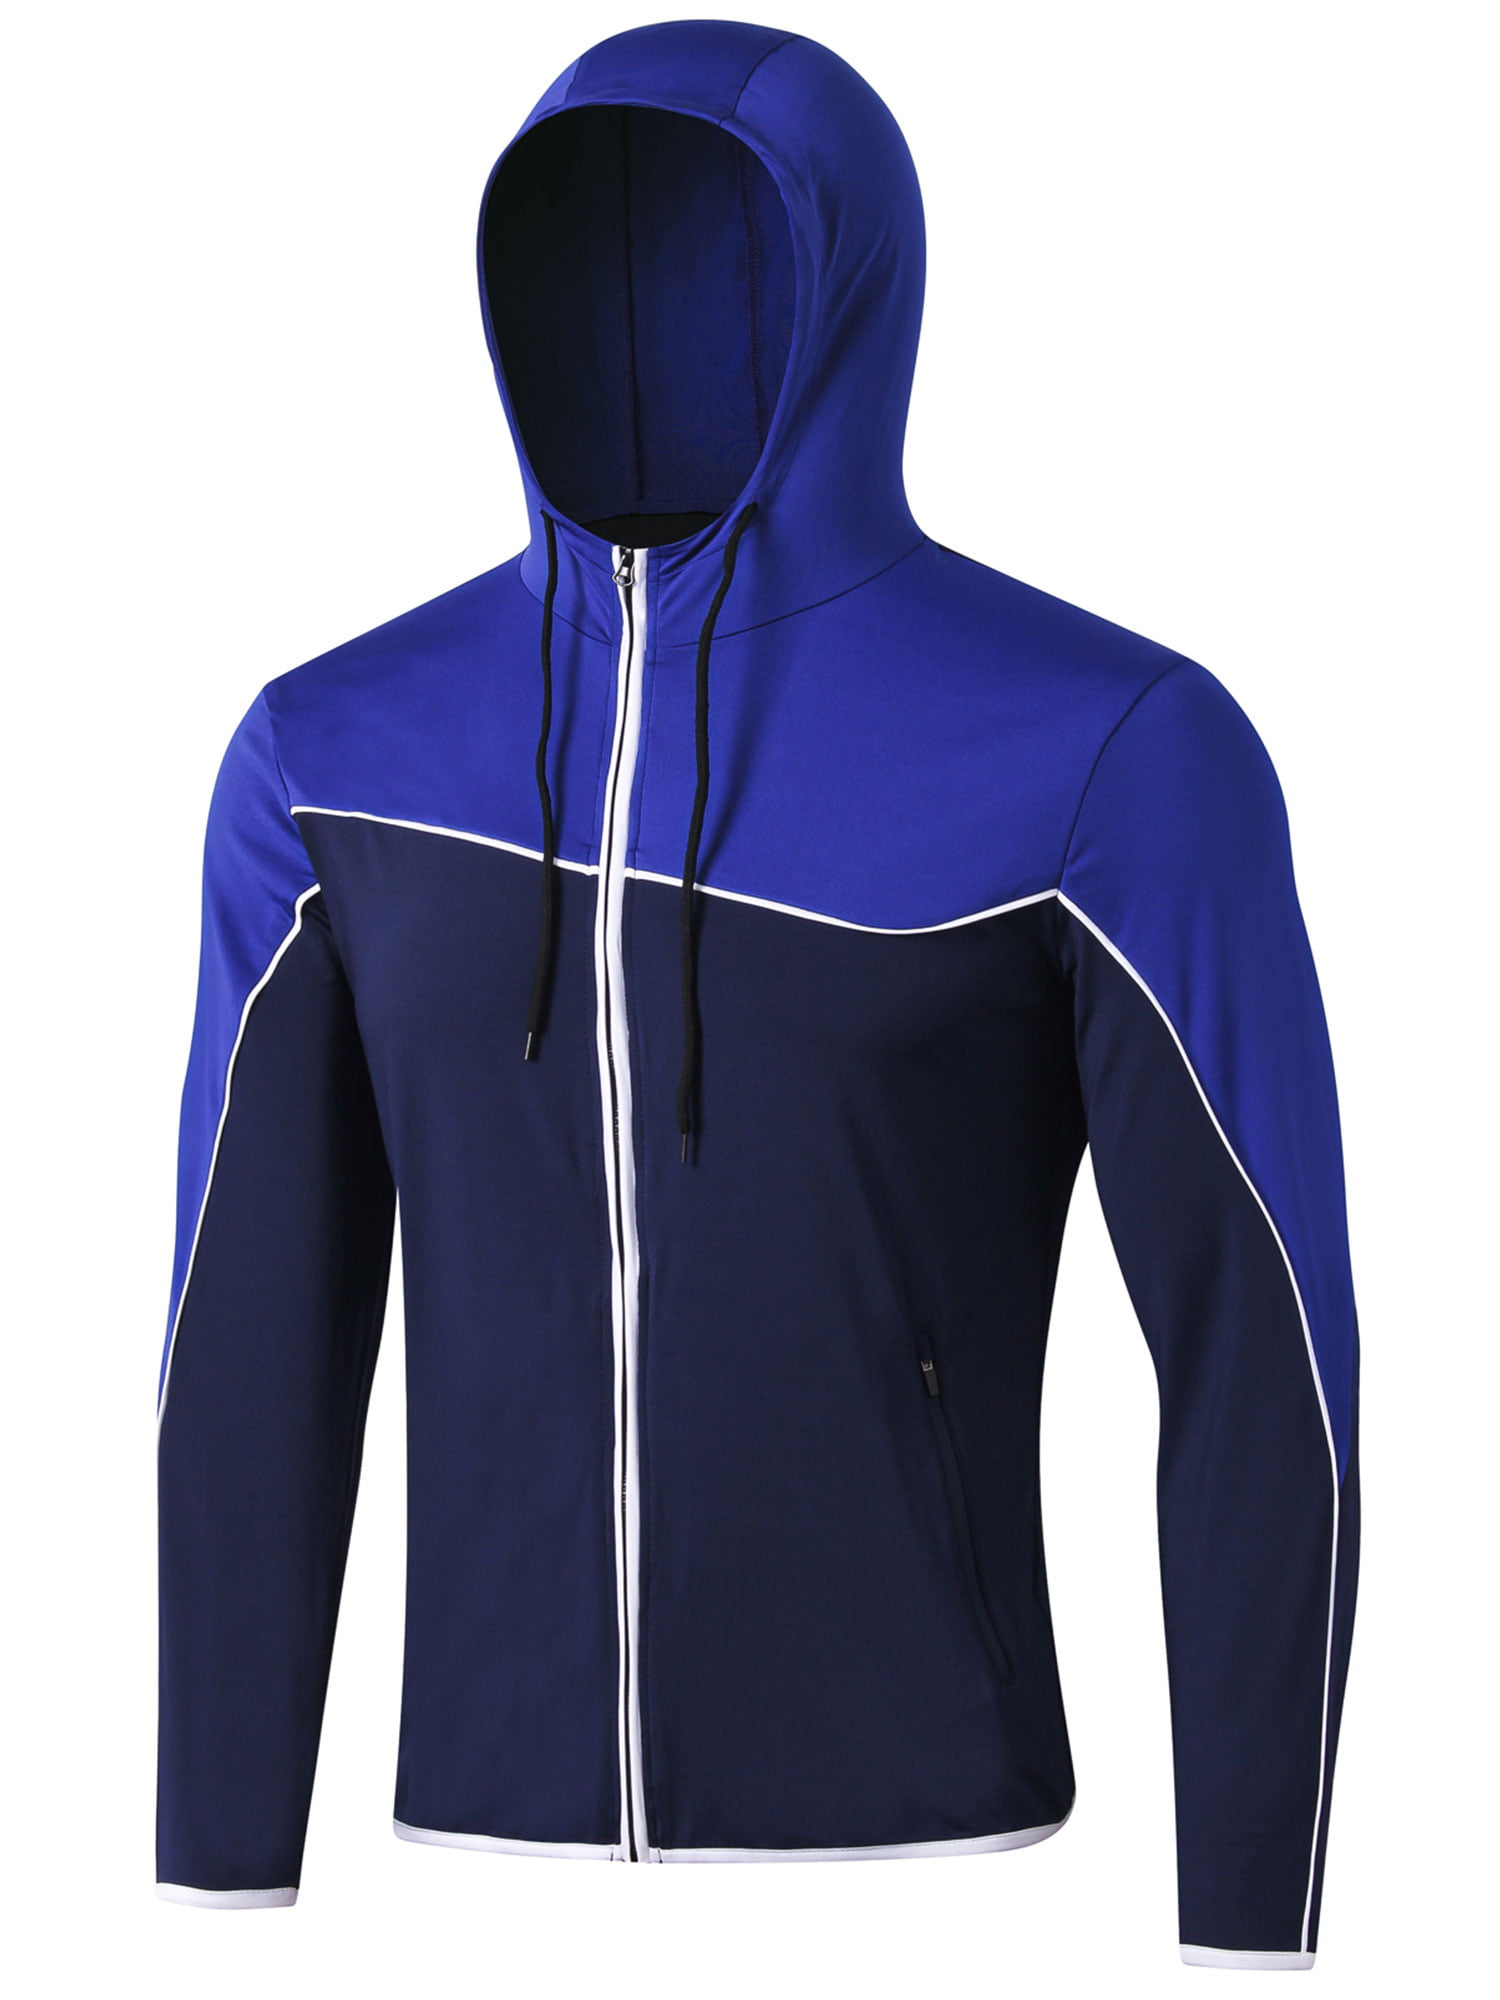 Details about   Moving Comfort Blue Hooded Full Zip Running Jacket Size Medium